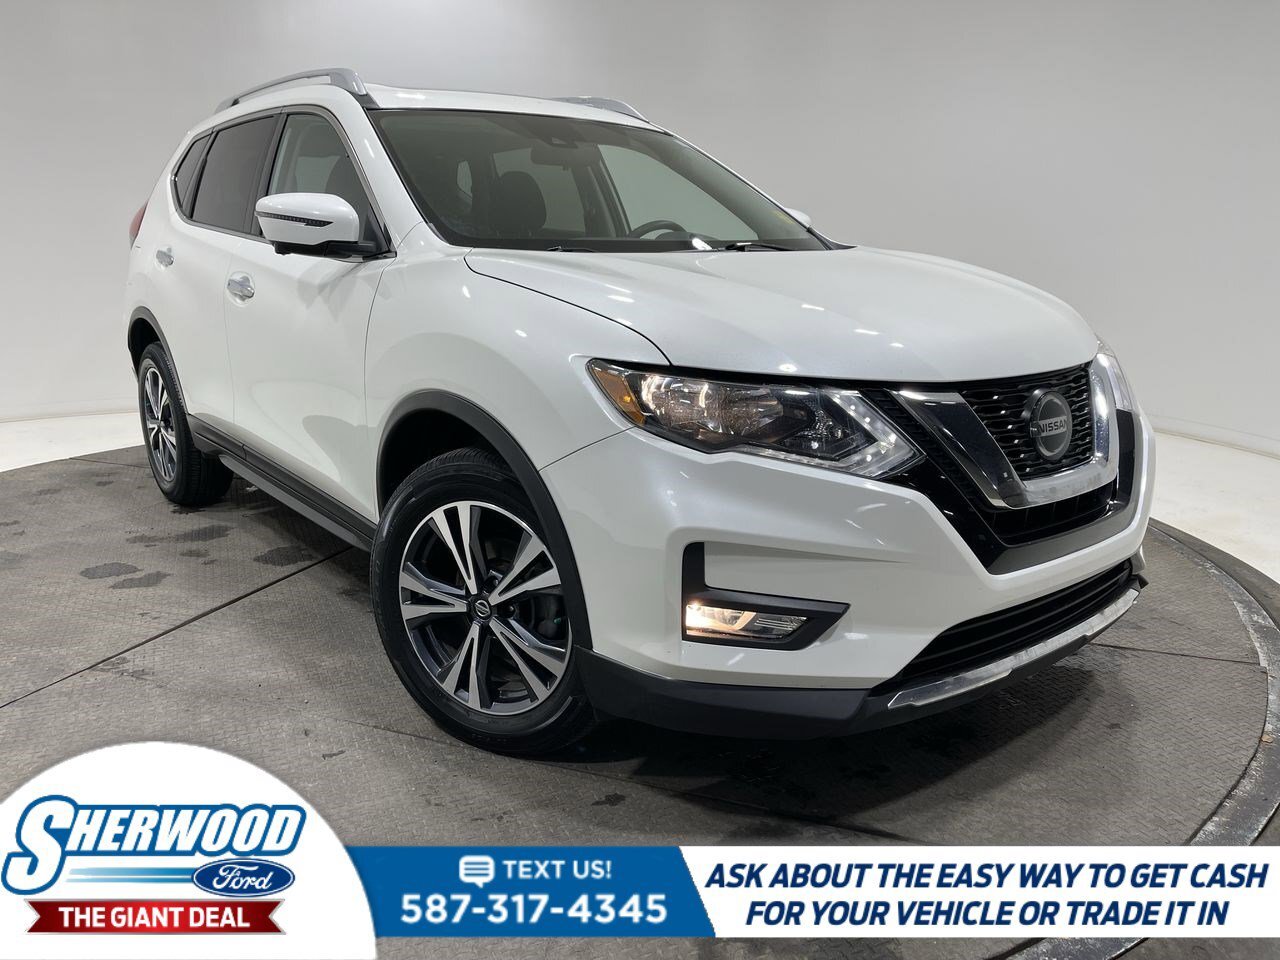 2019 Nissan Rogue SL $0 Down $117 Weekly- NEW TIRES CLEAN CARFAX